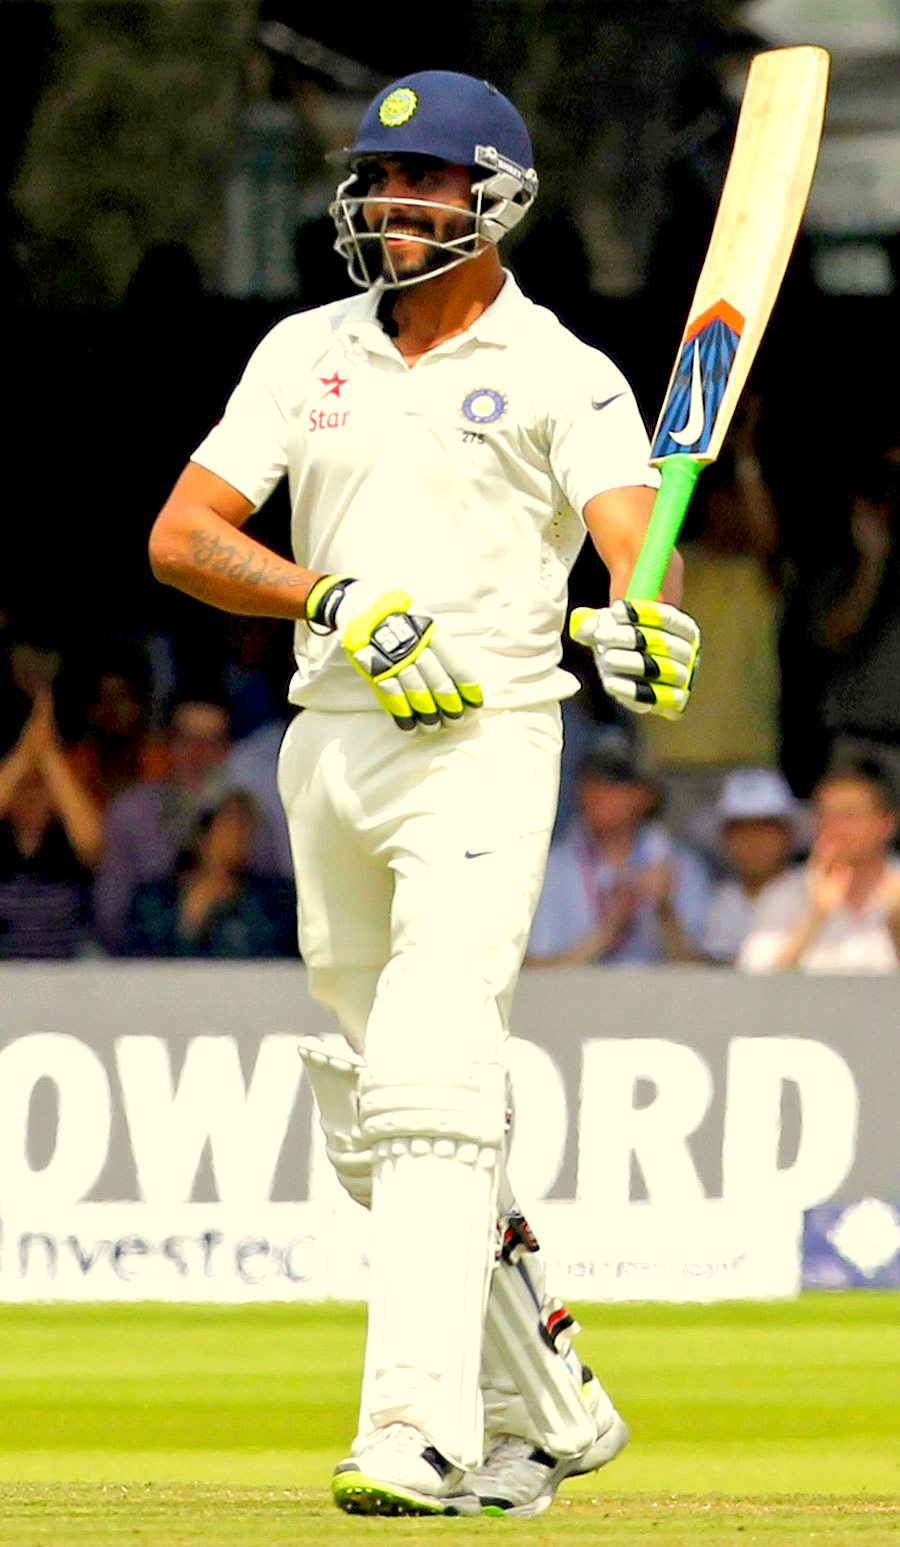 Jadeja scored 68(57) to give a Big lead to India against England | Source: Cricinfo